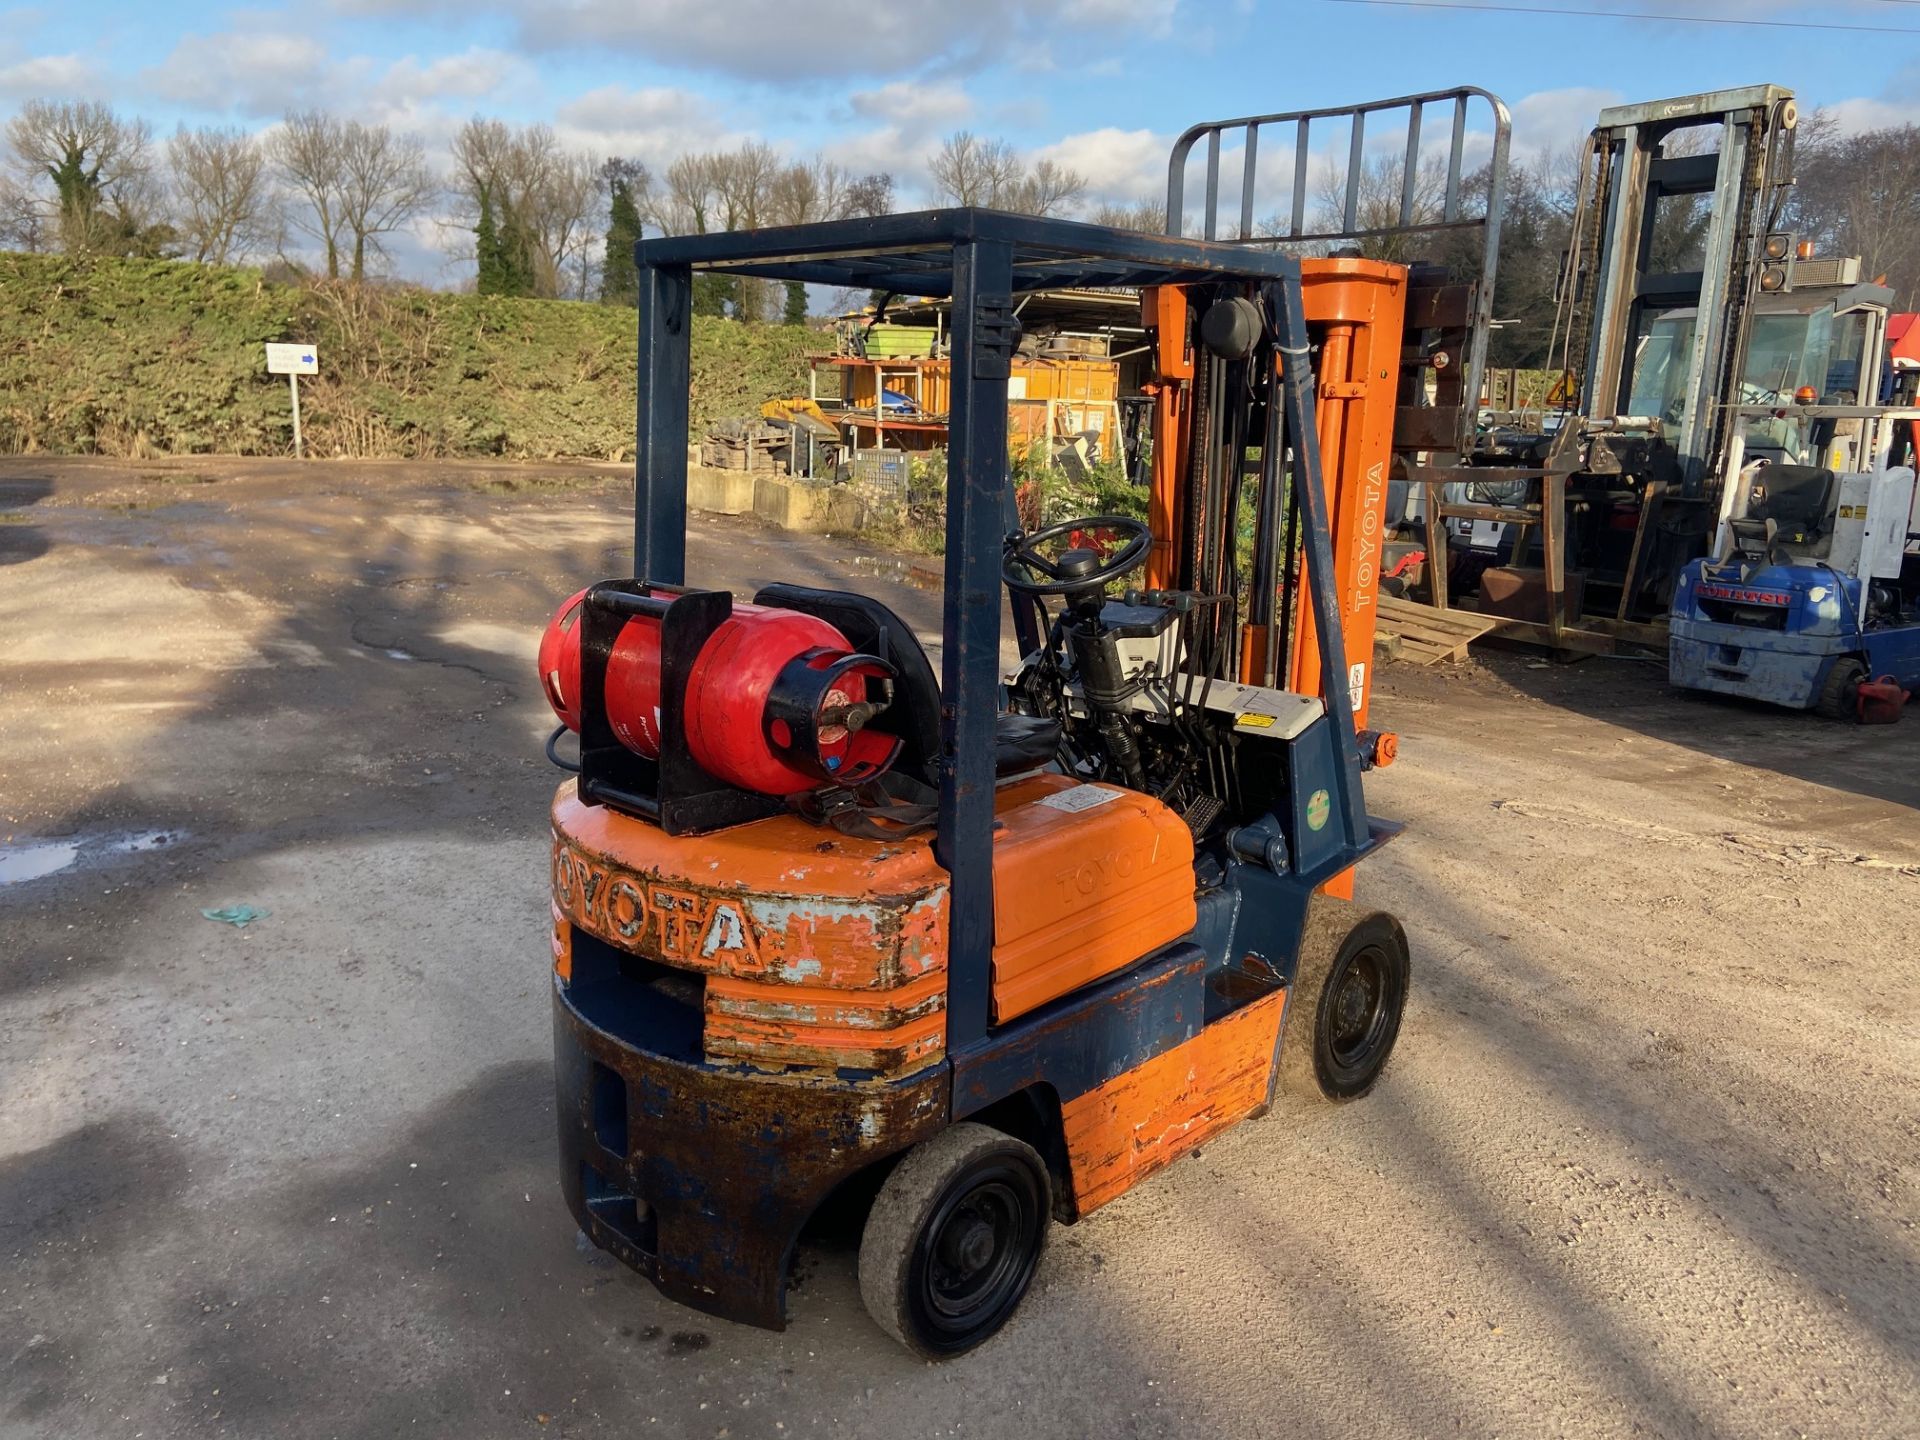 TOYOTA 1.5 TON GAS FORKLIFT, ALL OPERATIONAL, SIDE SHIFT, TIDY LITTLE TRUCK, GAS BOTTLE NOT INCLUDED - Bild 3 aus 5